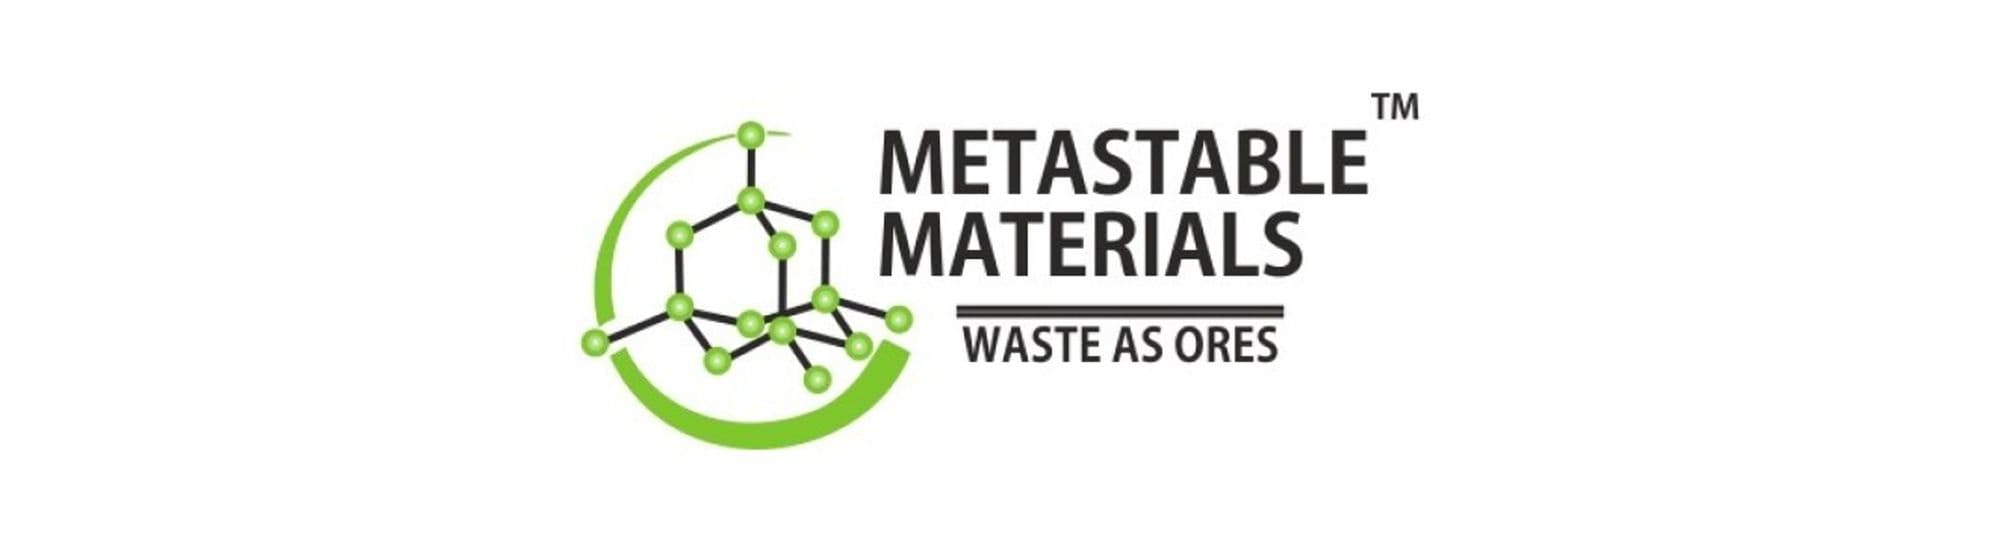 Metastable Materials Cover Image